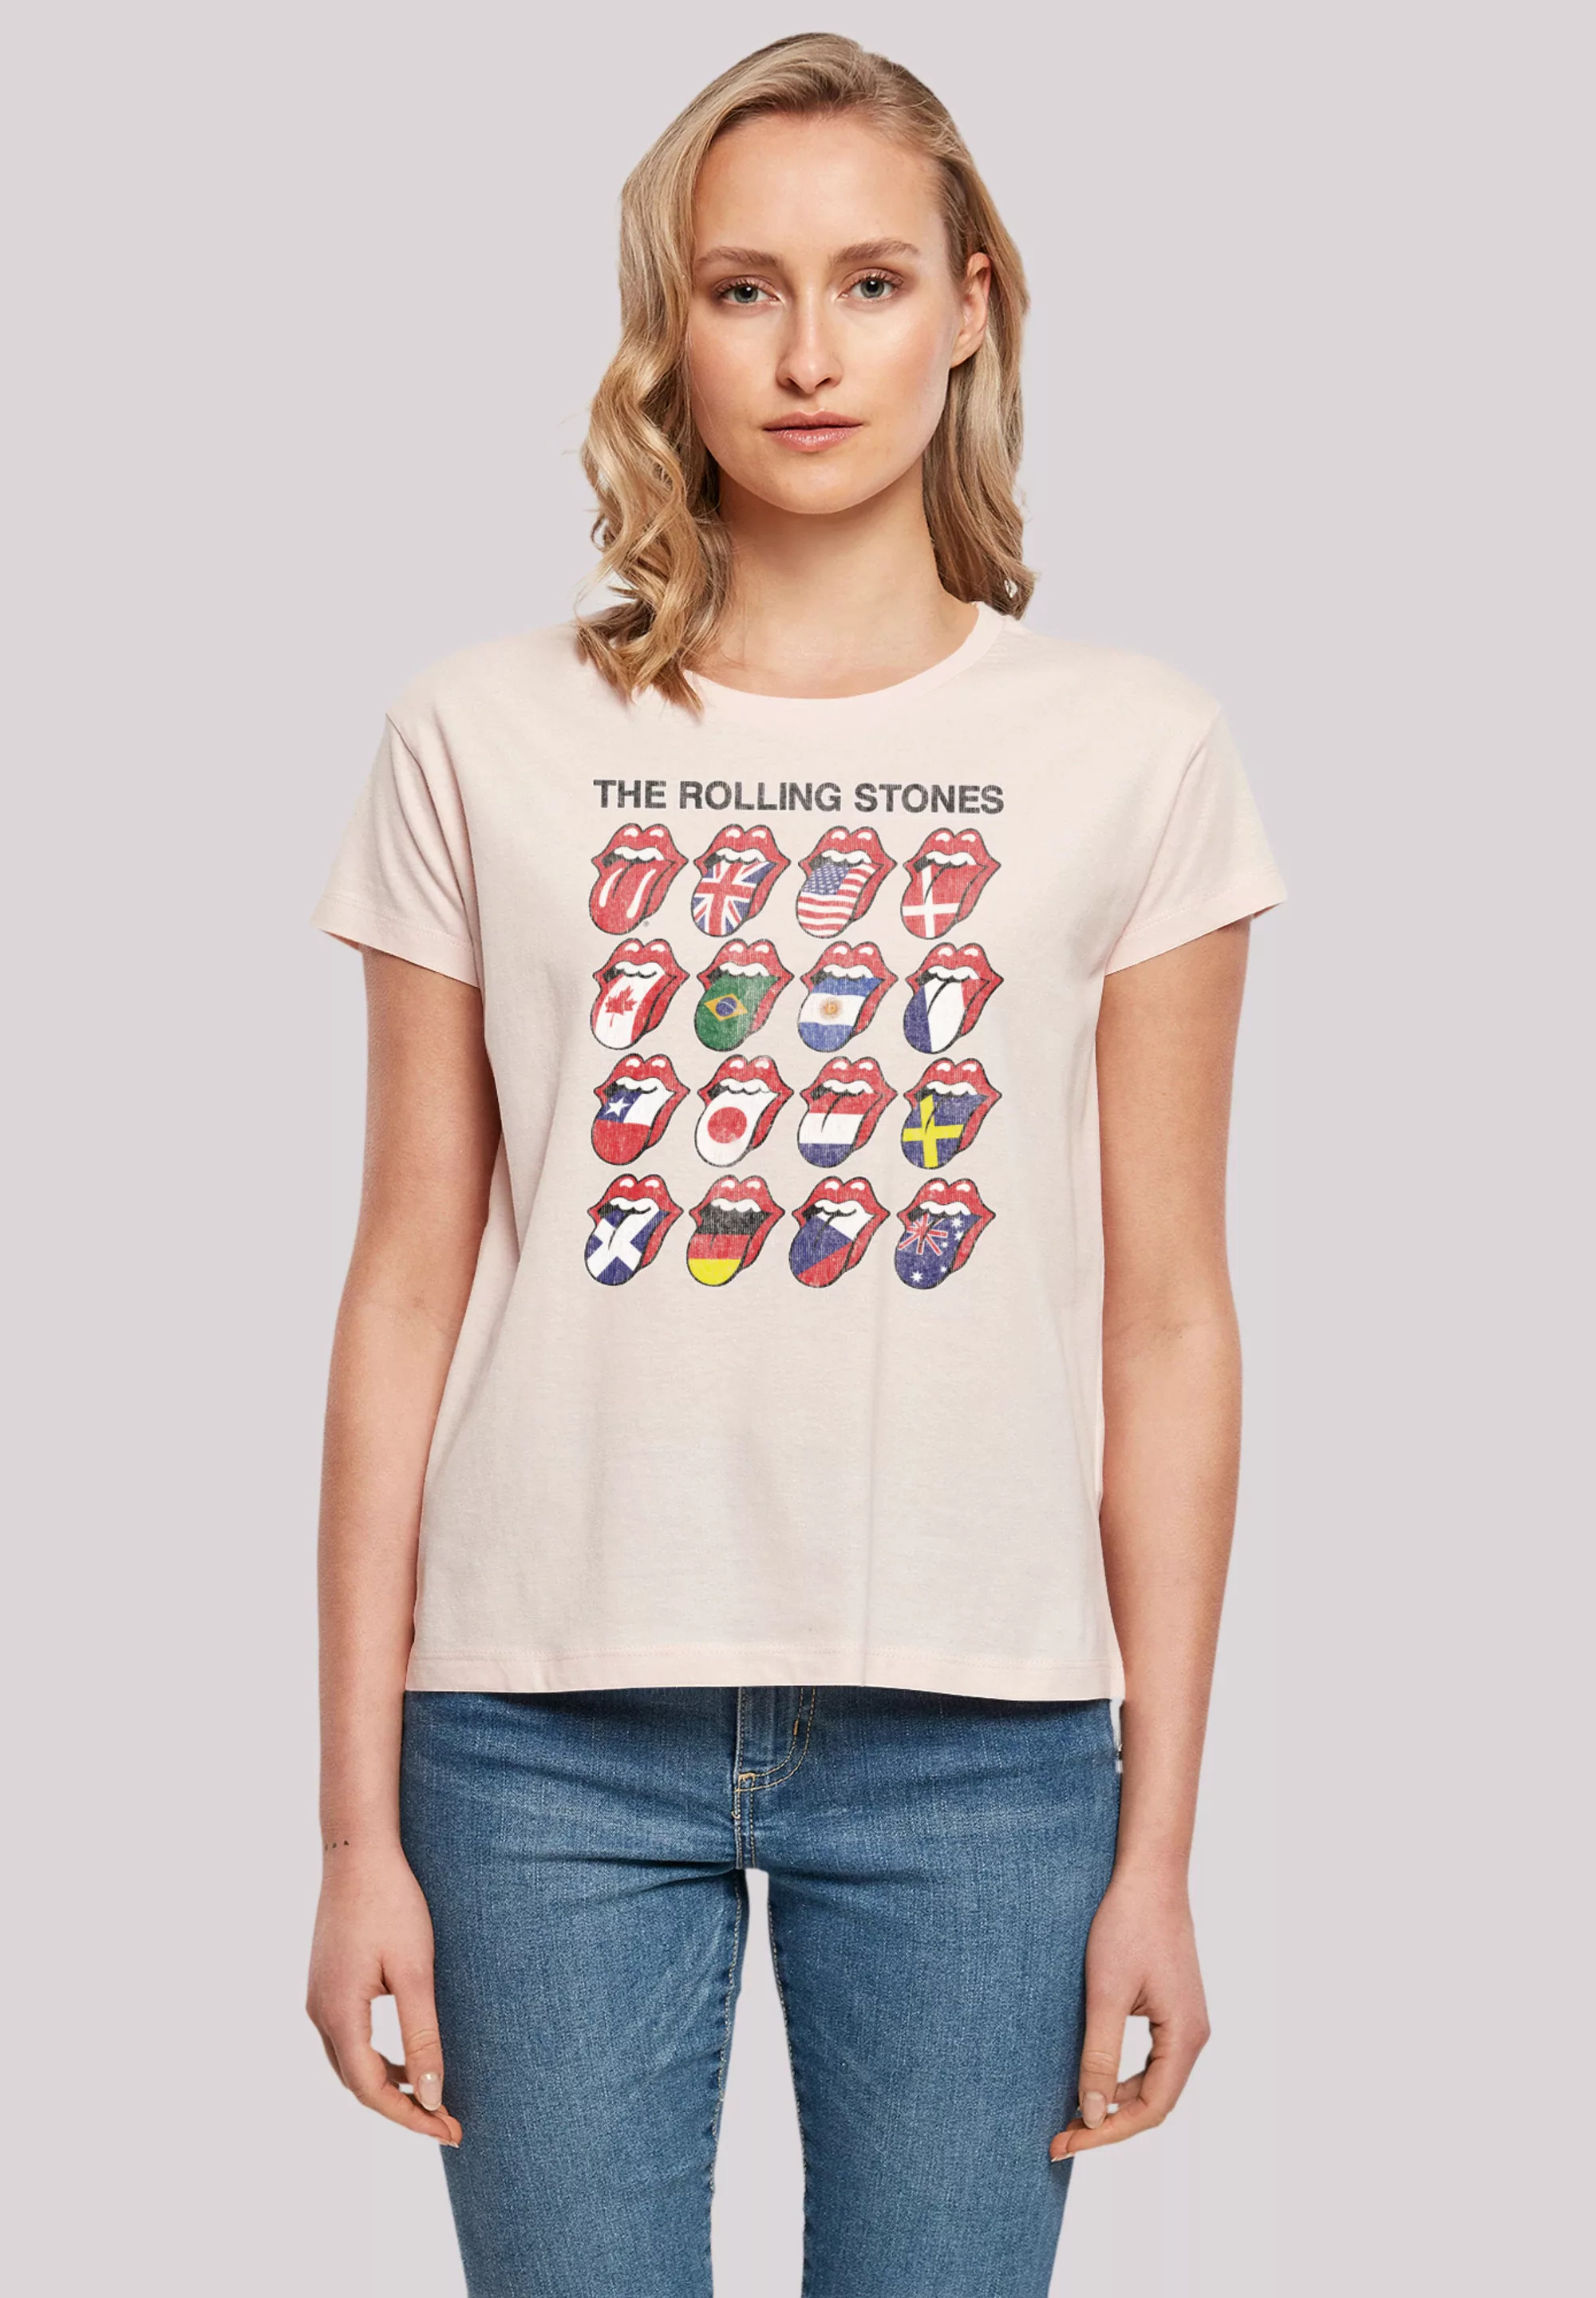 F4NT4STIC T-Shirt "The Rolling Stones Voodoo Lounge Tongues", Musik, Band, günstig online kaufen